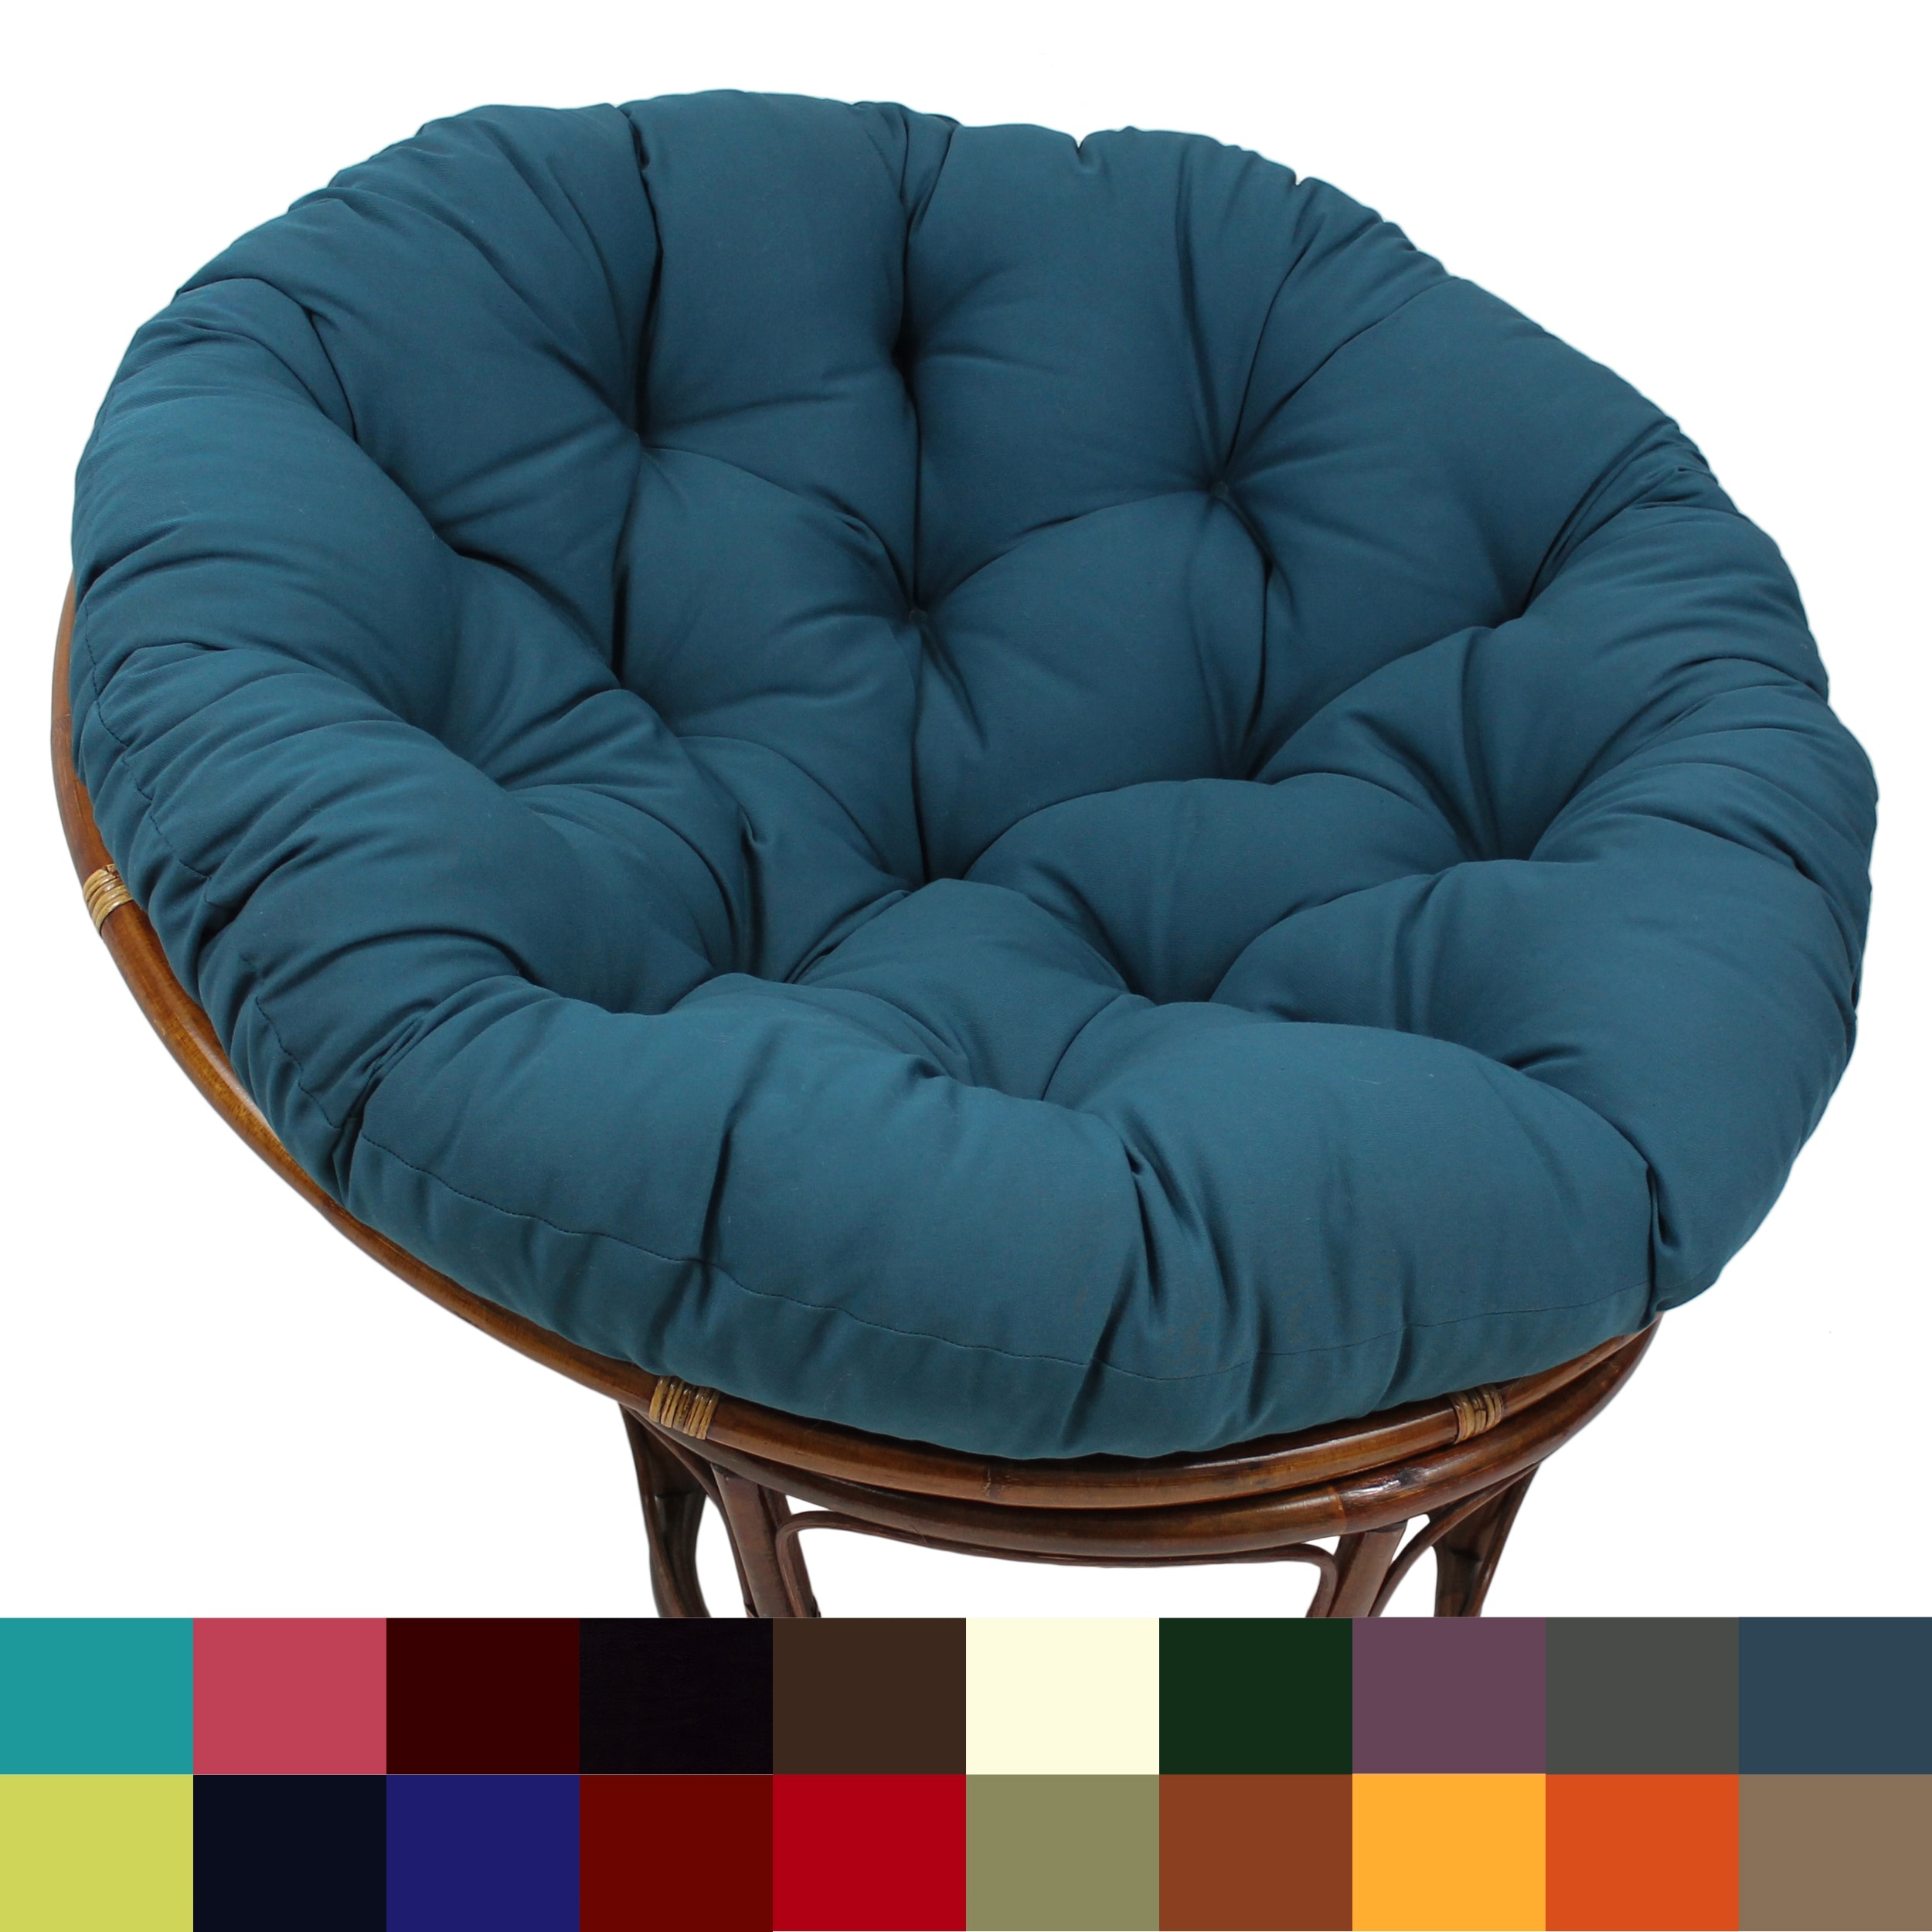 https://ak1.ostkcdn.com/images/products/is/images/direct/33f9ab6970db13704bad650762f80615c4d08379/52-inch-Solid-Twill-Papasan-Cushion-%28Cushion-Only%29.jpg